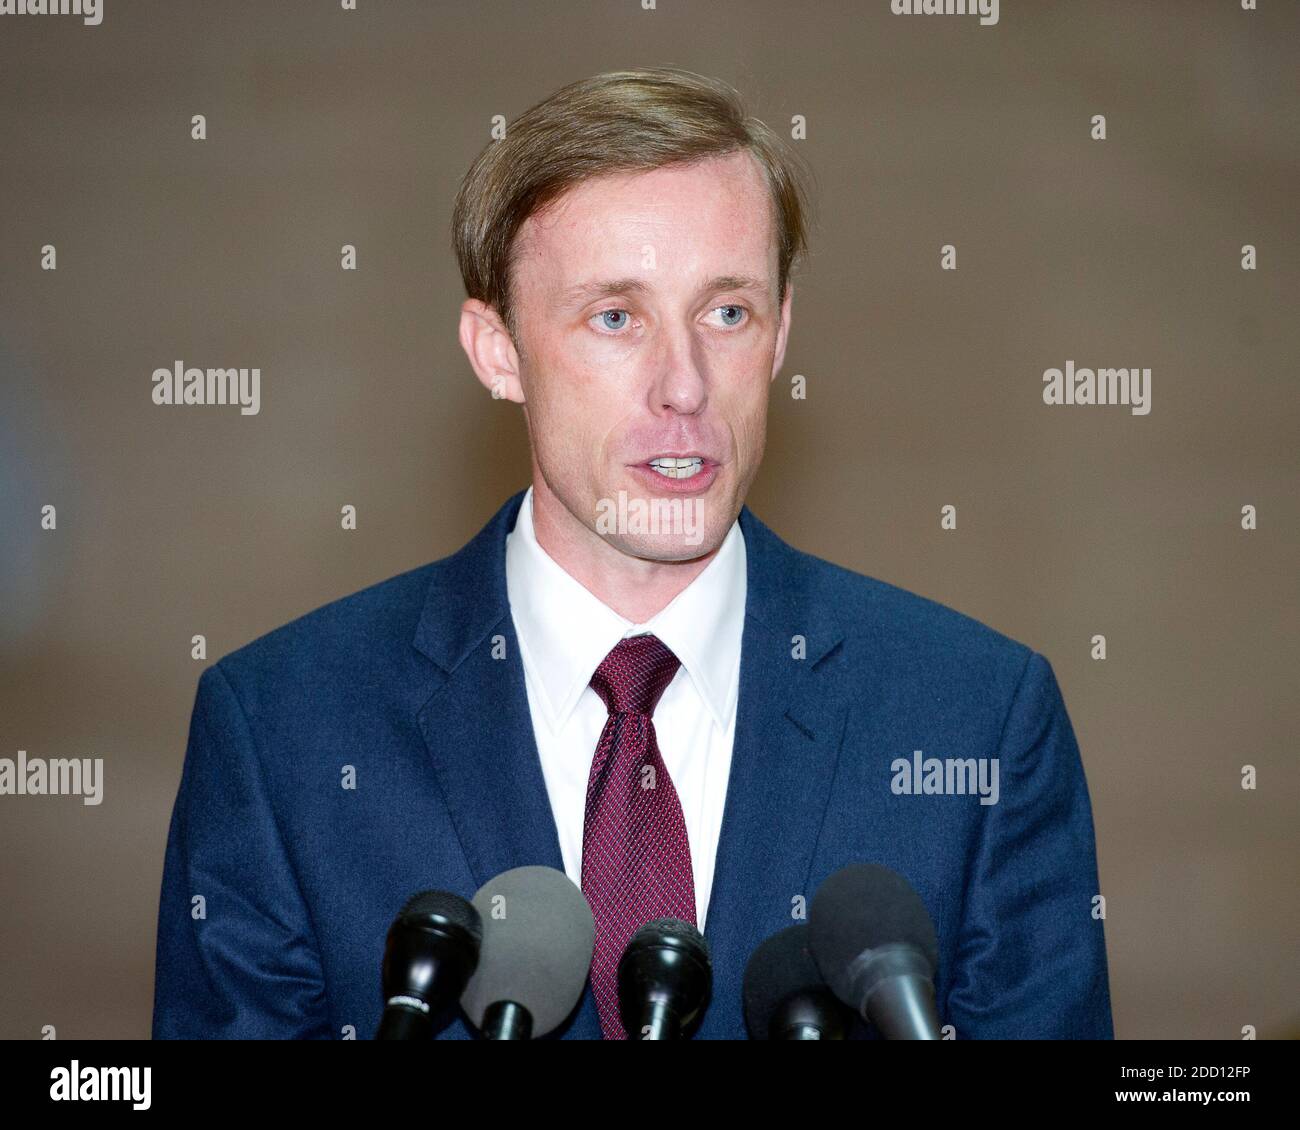 Jake Sullivan, top foreign policy advisor to Hillary Rodham Clinton's 2016 election campaign, makes remarks to the media as he departs following his deposition to the US House Select Committee to Investigate the 2012 Benghazi Attack, in the US Capitol in Washington, DC on Friday, September 4, 2015. Credit: Ron Sachs / CNP (RESTRICTION: NO New York or New Jersey Newspapers or newspapers within a 75 mile radius of New York City) | usage worldwide Stock Photo